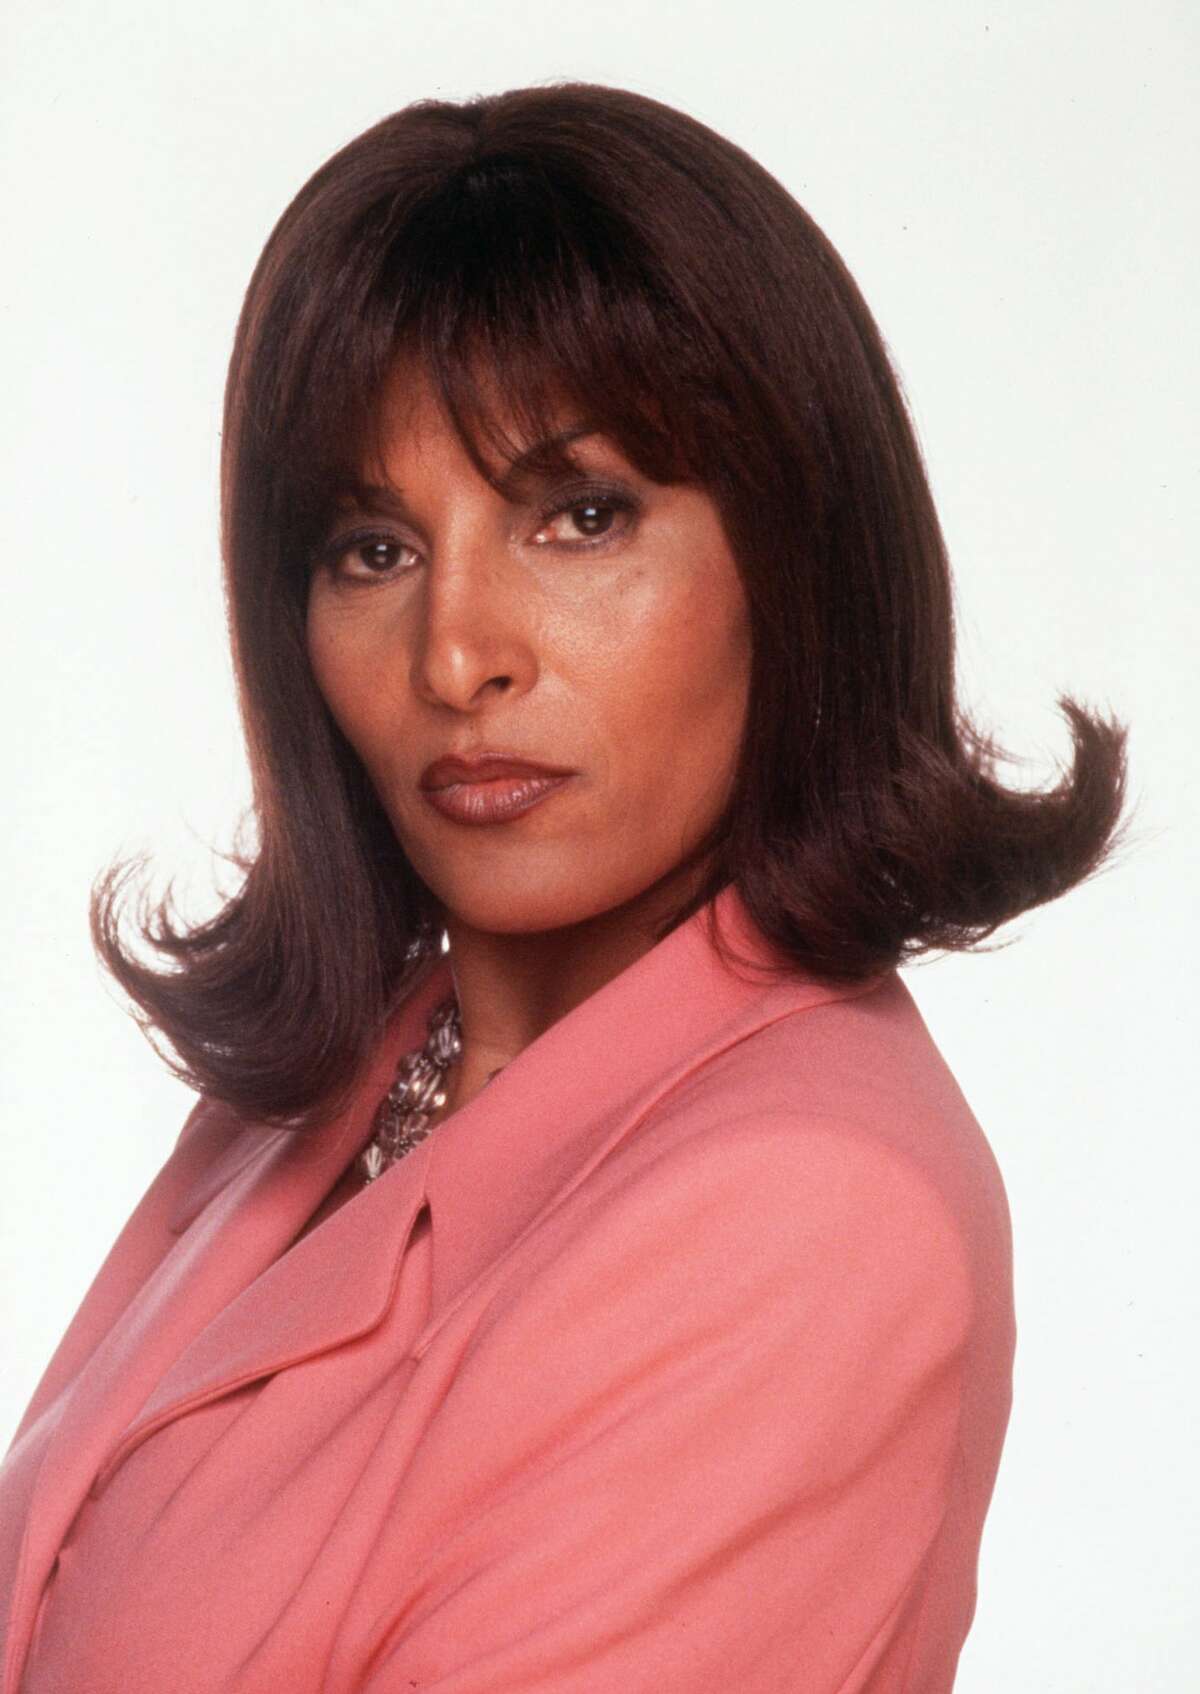 FILE--Actress Pam Grier is shown in this 1998 handout photo. Grier has canceled a weekend trip to an inaugural festival celebrating the accomplishments of women in film in Rochester, N.Y. Grier said she was ill and unable to travel from California to the High Falls Film Festival to accept a career achievement award on Saturday, Oct. 20, 2001. (AP Photo/Jim Bridges, HO)